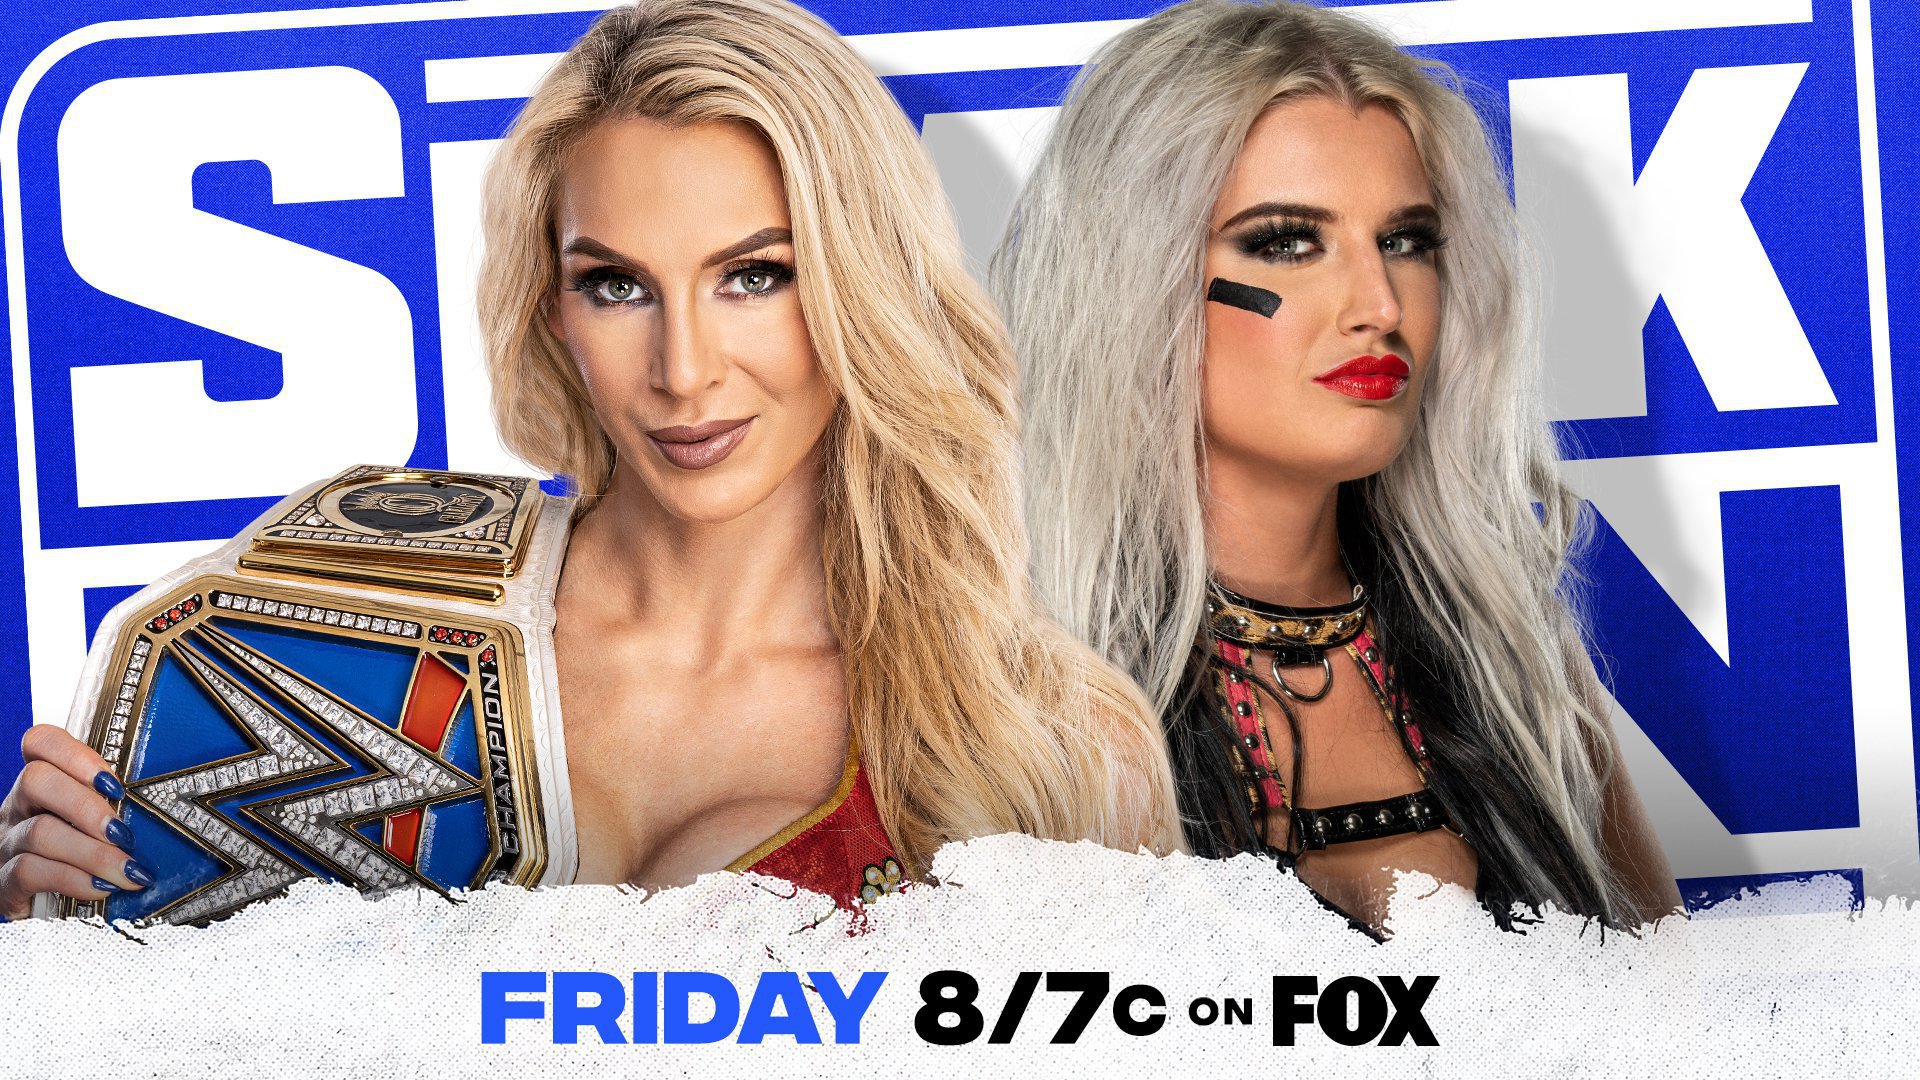 Toni Storm to challenge Charlotte Flair for the SmackDown Women's Title